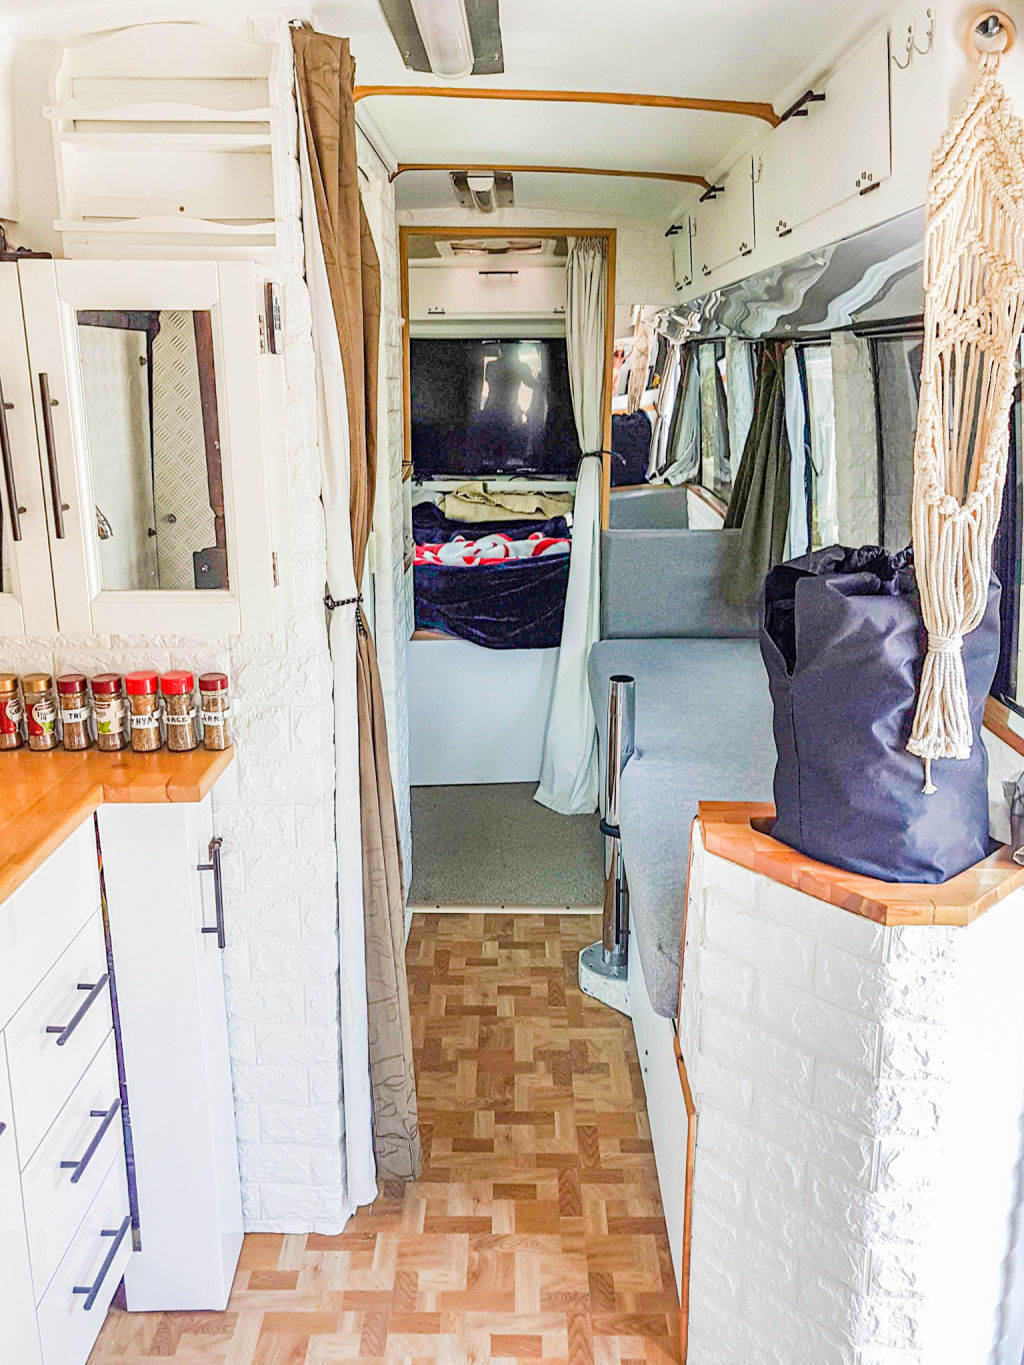 The bus is a spacious, functional home for the road. Photo: Paul Mercer